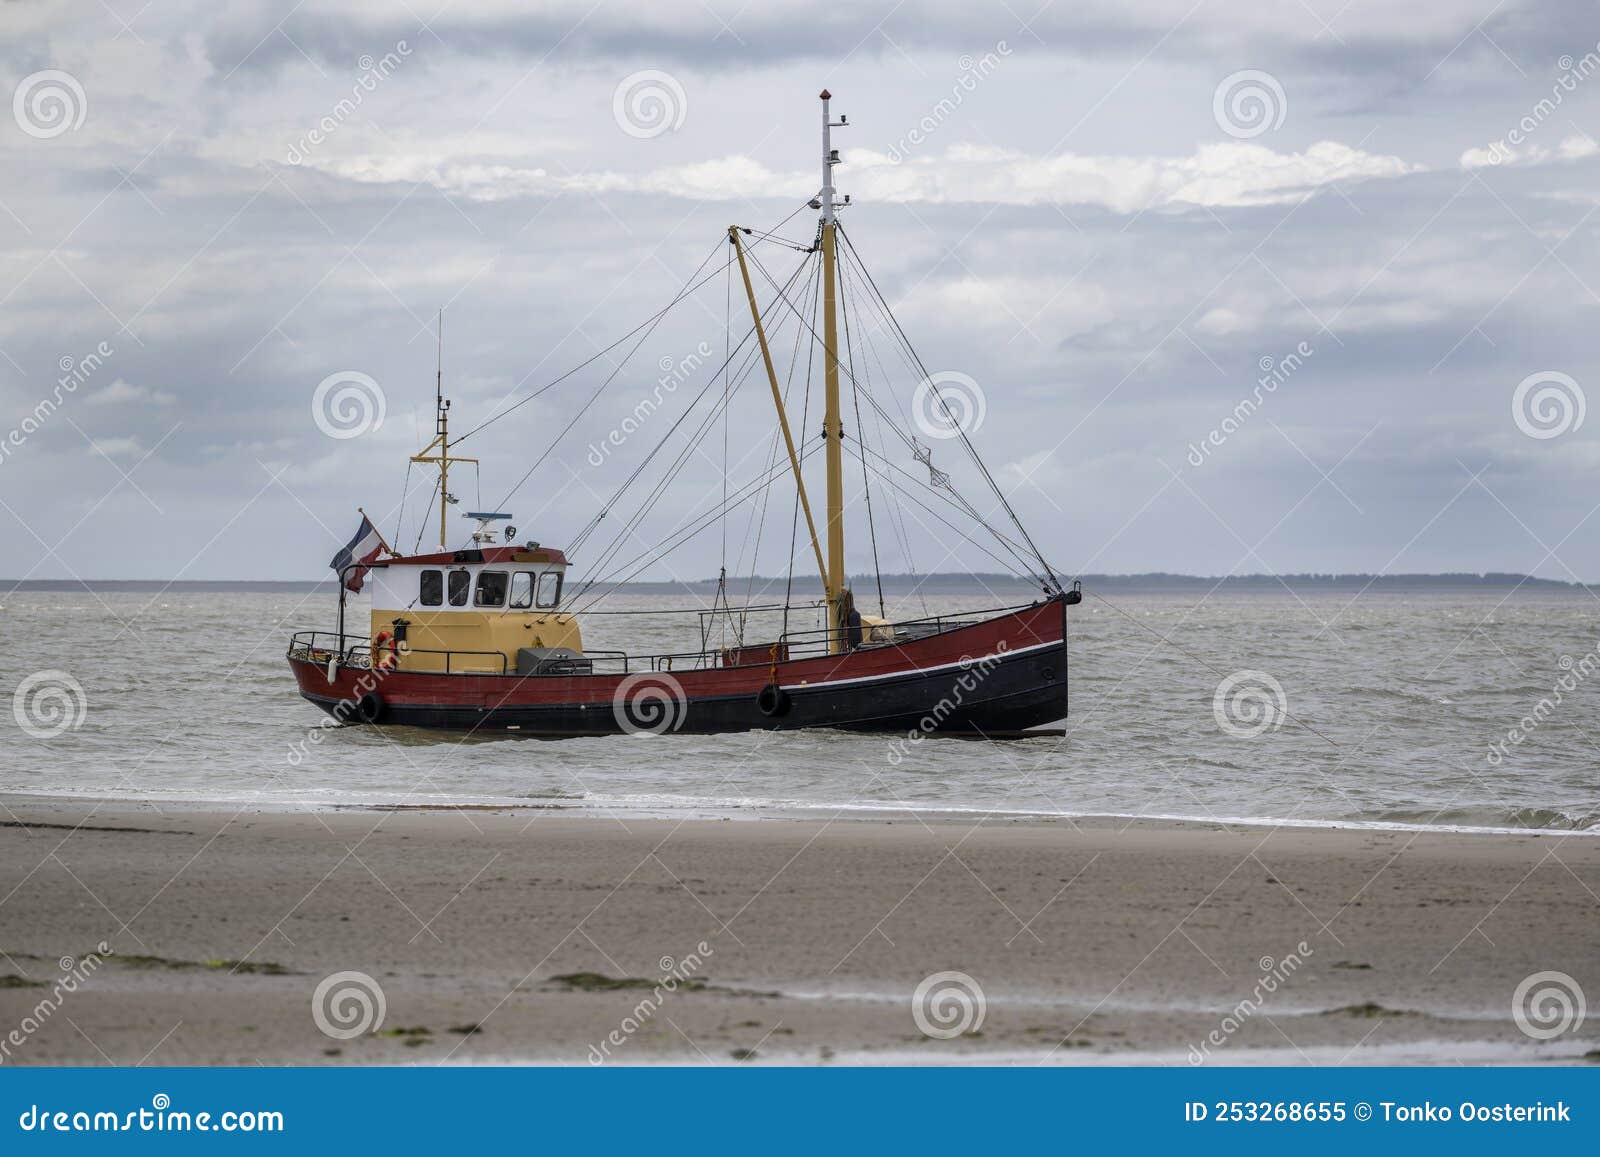 old fishing cutter in the netherlands